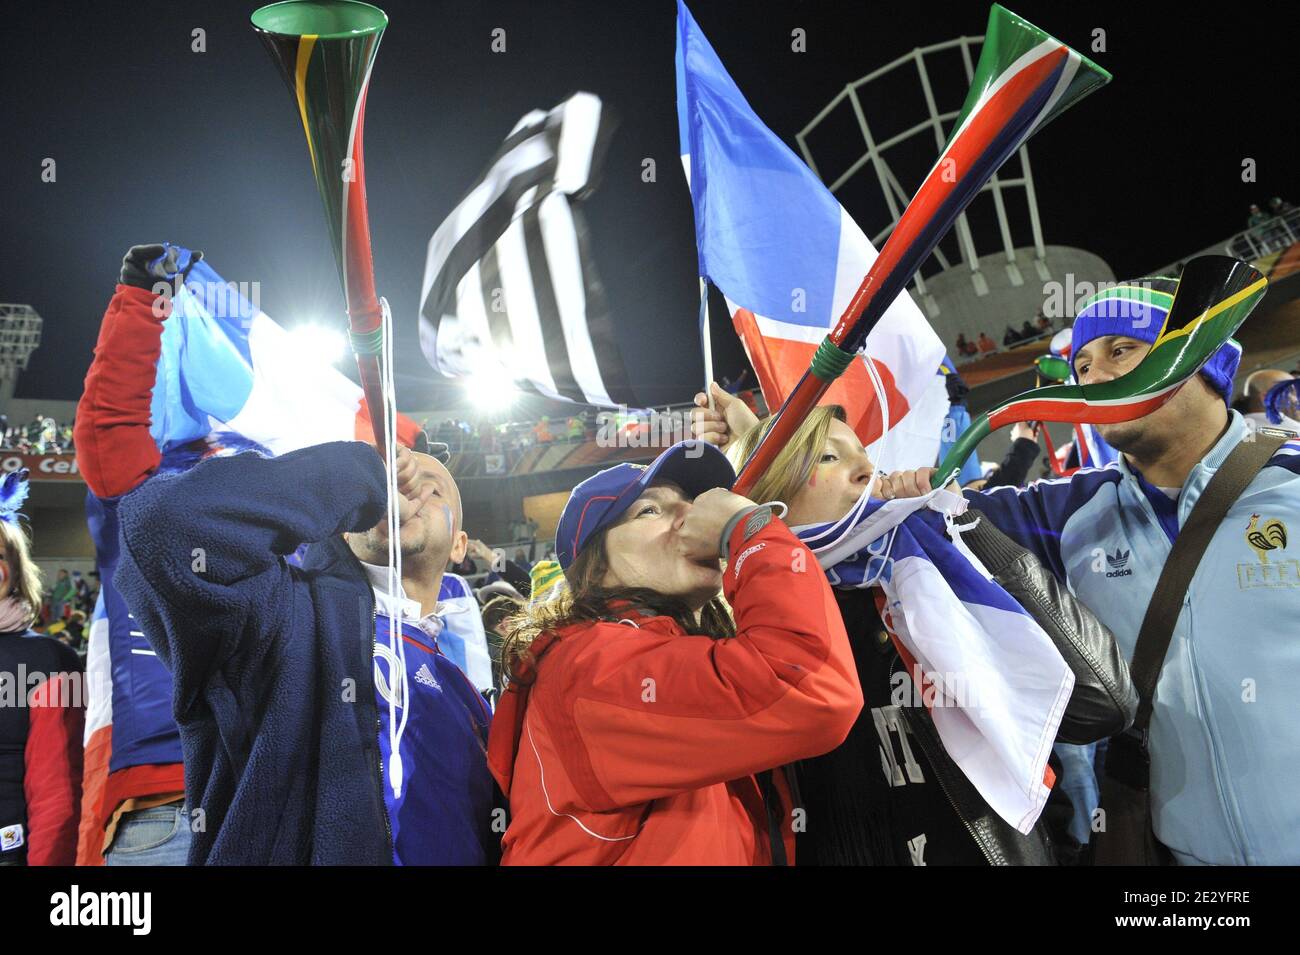 French fans demonstrate prior to the 2010 FIFA World Cup soccer match, Group A, France vs Mexico at Peter Mokaba Stadium, in Polokwane, South Africa on June 17, 2010. France won 2-0. Photo by Christophe Guibbaud/Cameleon/ABACAPRESS.COM Stock Photo